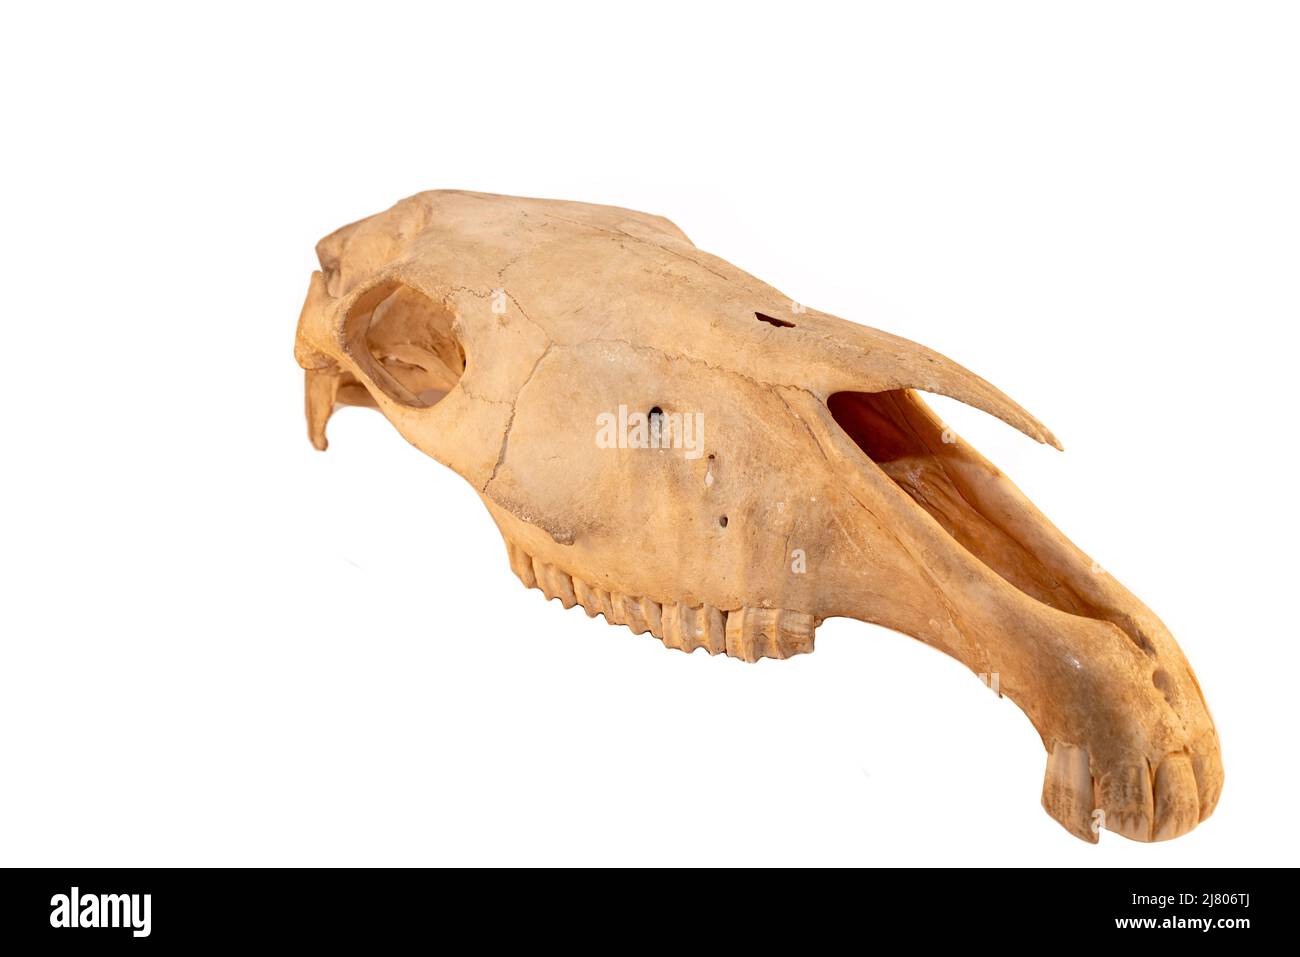 Horse equine (Equus caballus) mammal with natures teeth and skull anatomy on white background. Natures and biology of domestic animals. Stock Photo